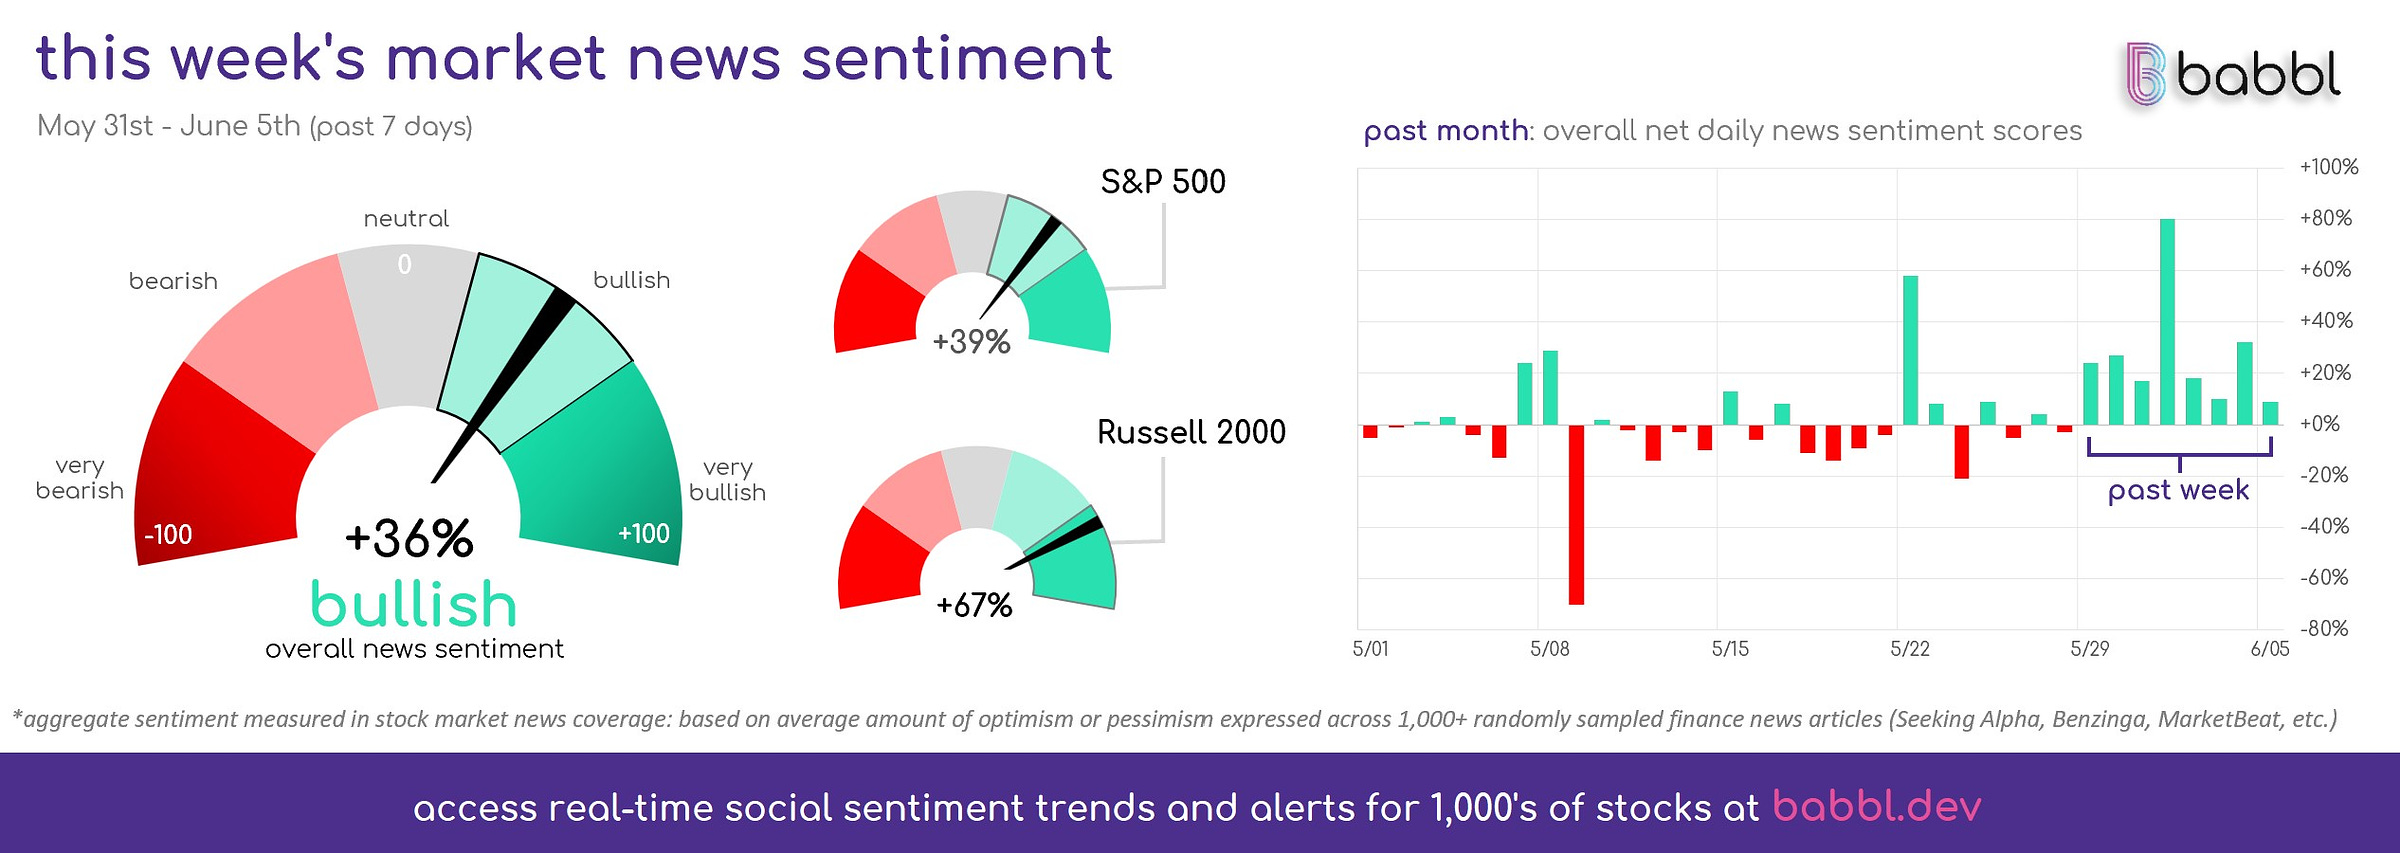 this week's overall market news sentiment: